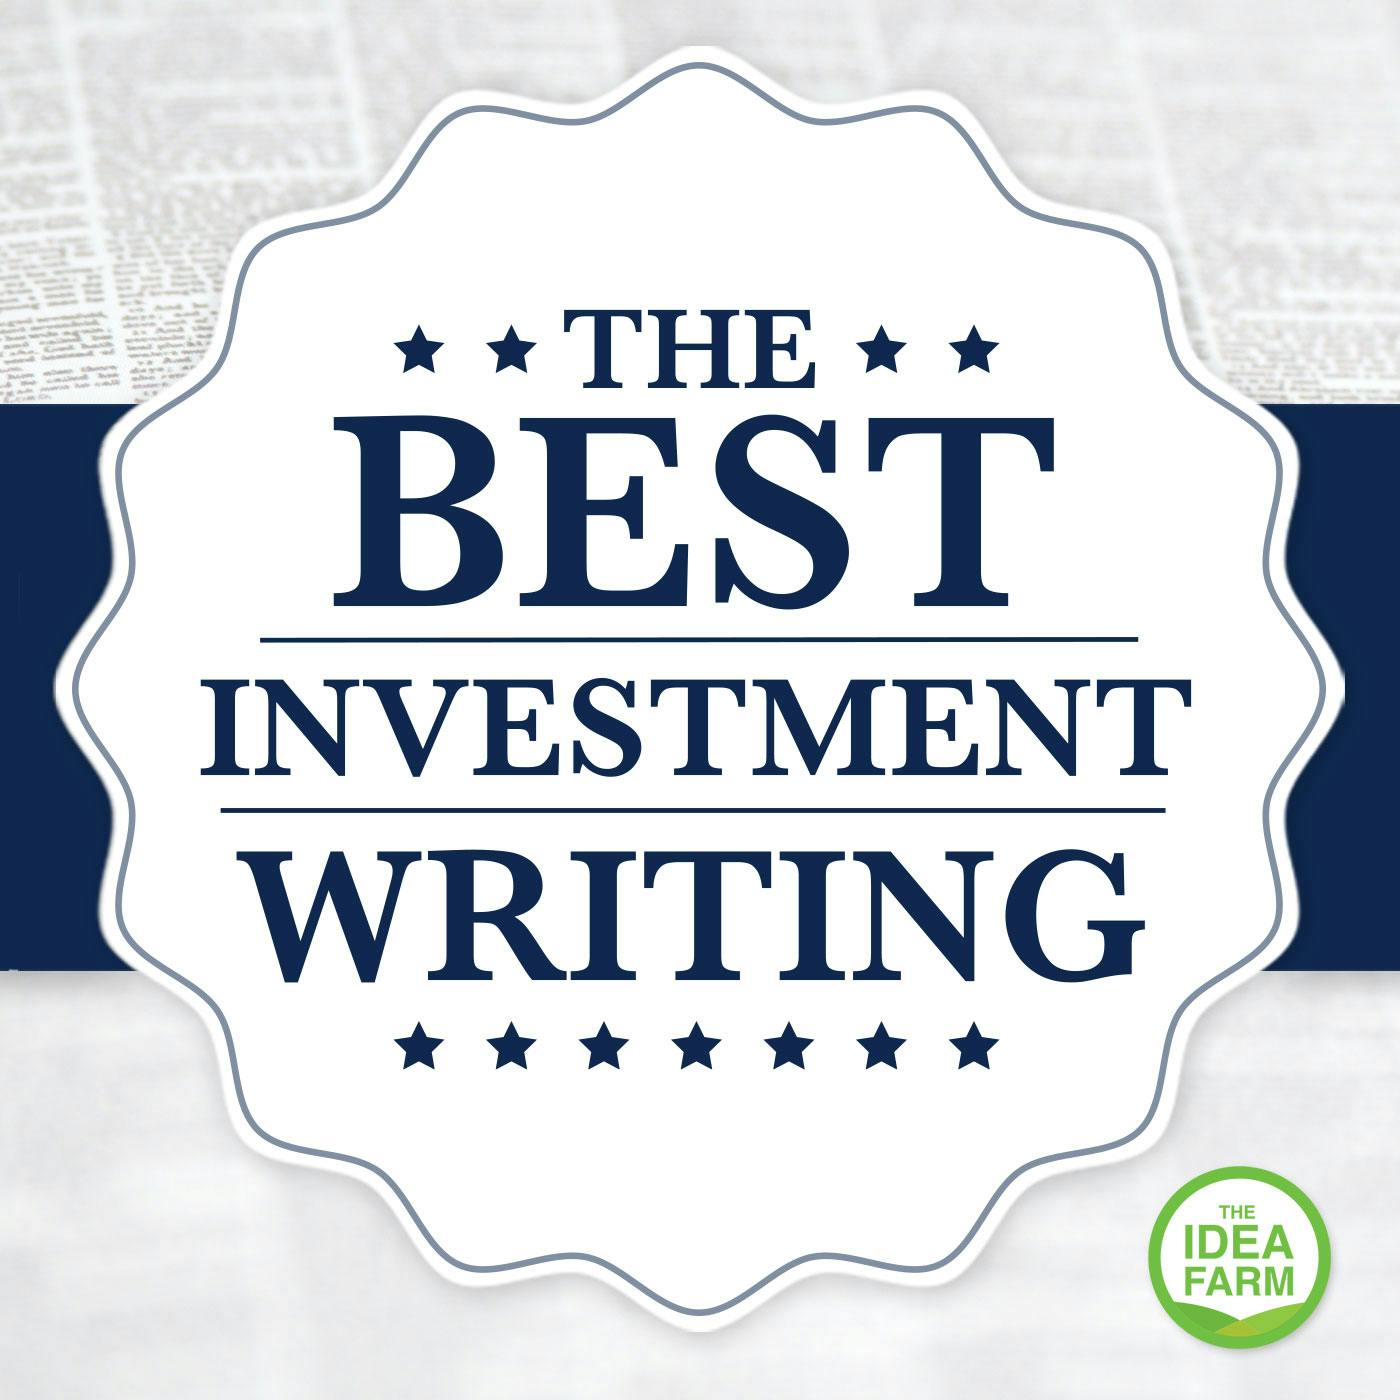 The Best Investment Writing Volume 5: Laurence Siegel, CFA Institute Research Foundation - Debunking Nine and a Half Myths of Investing